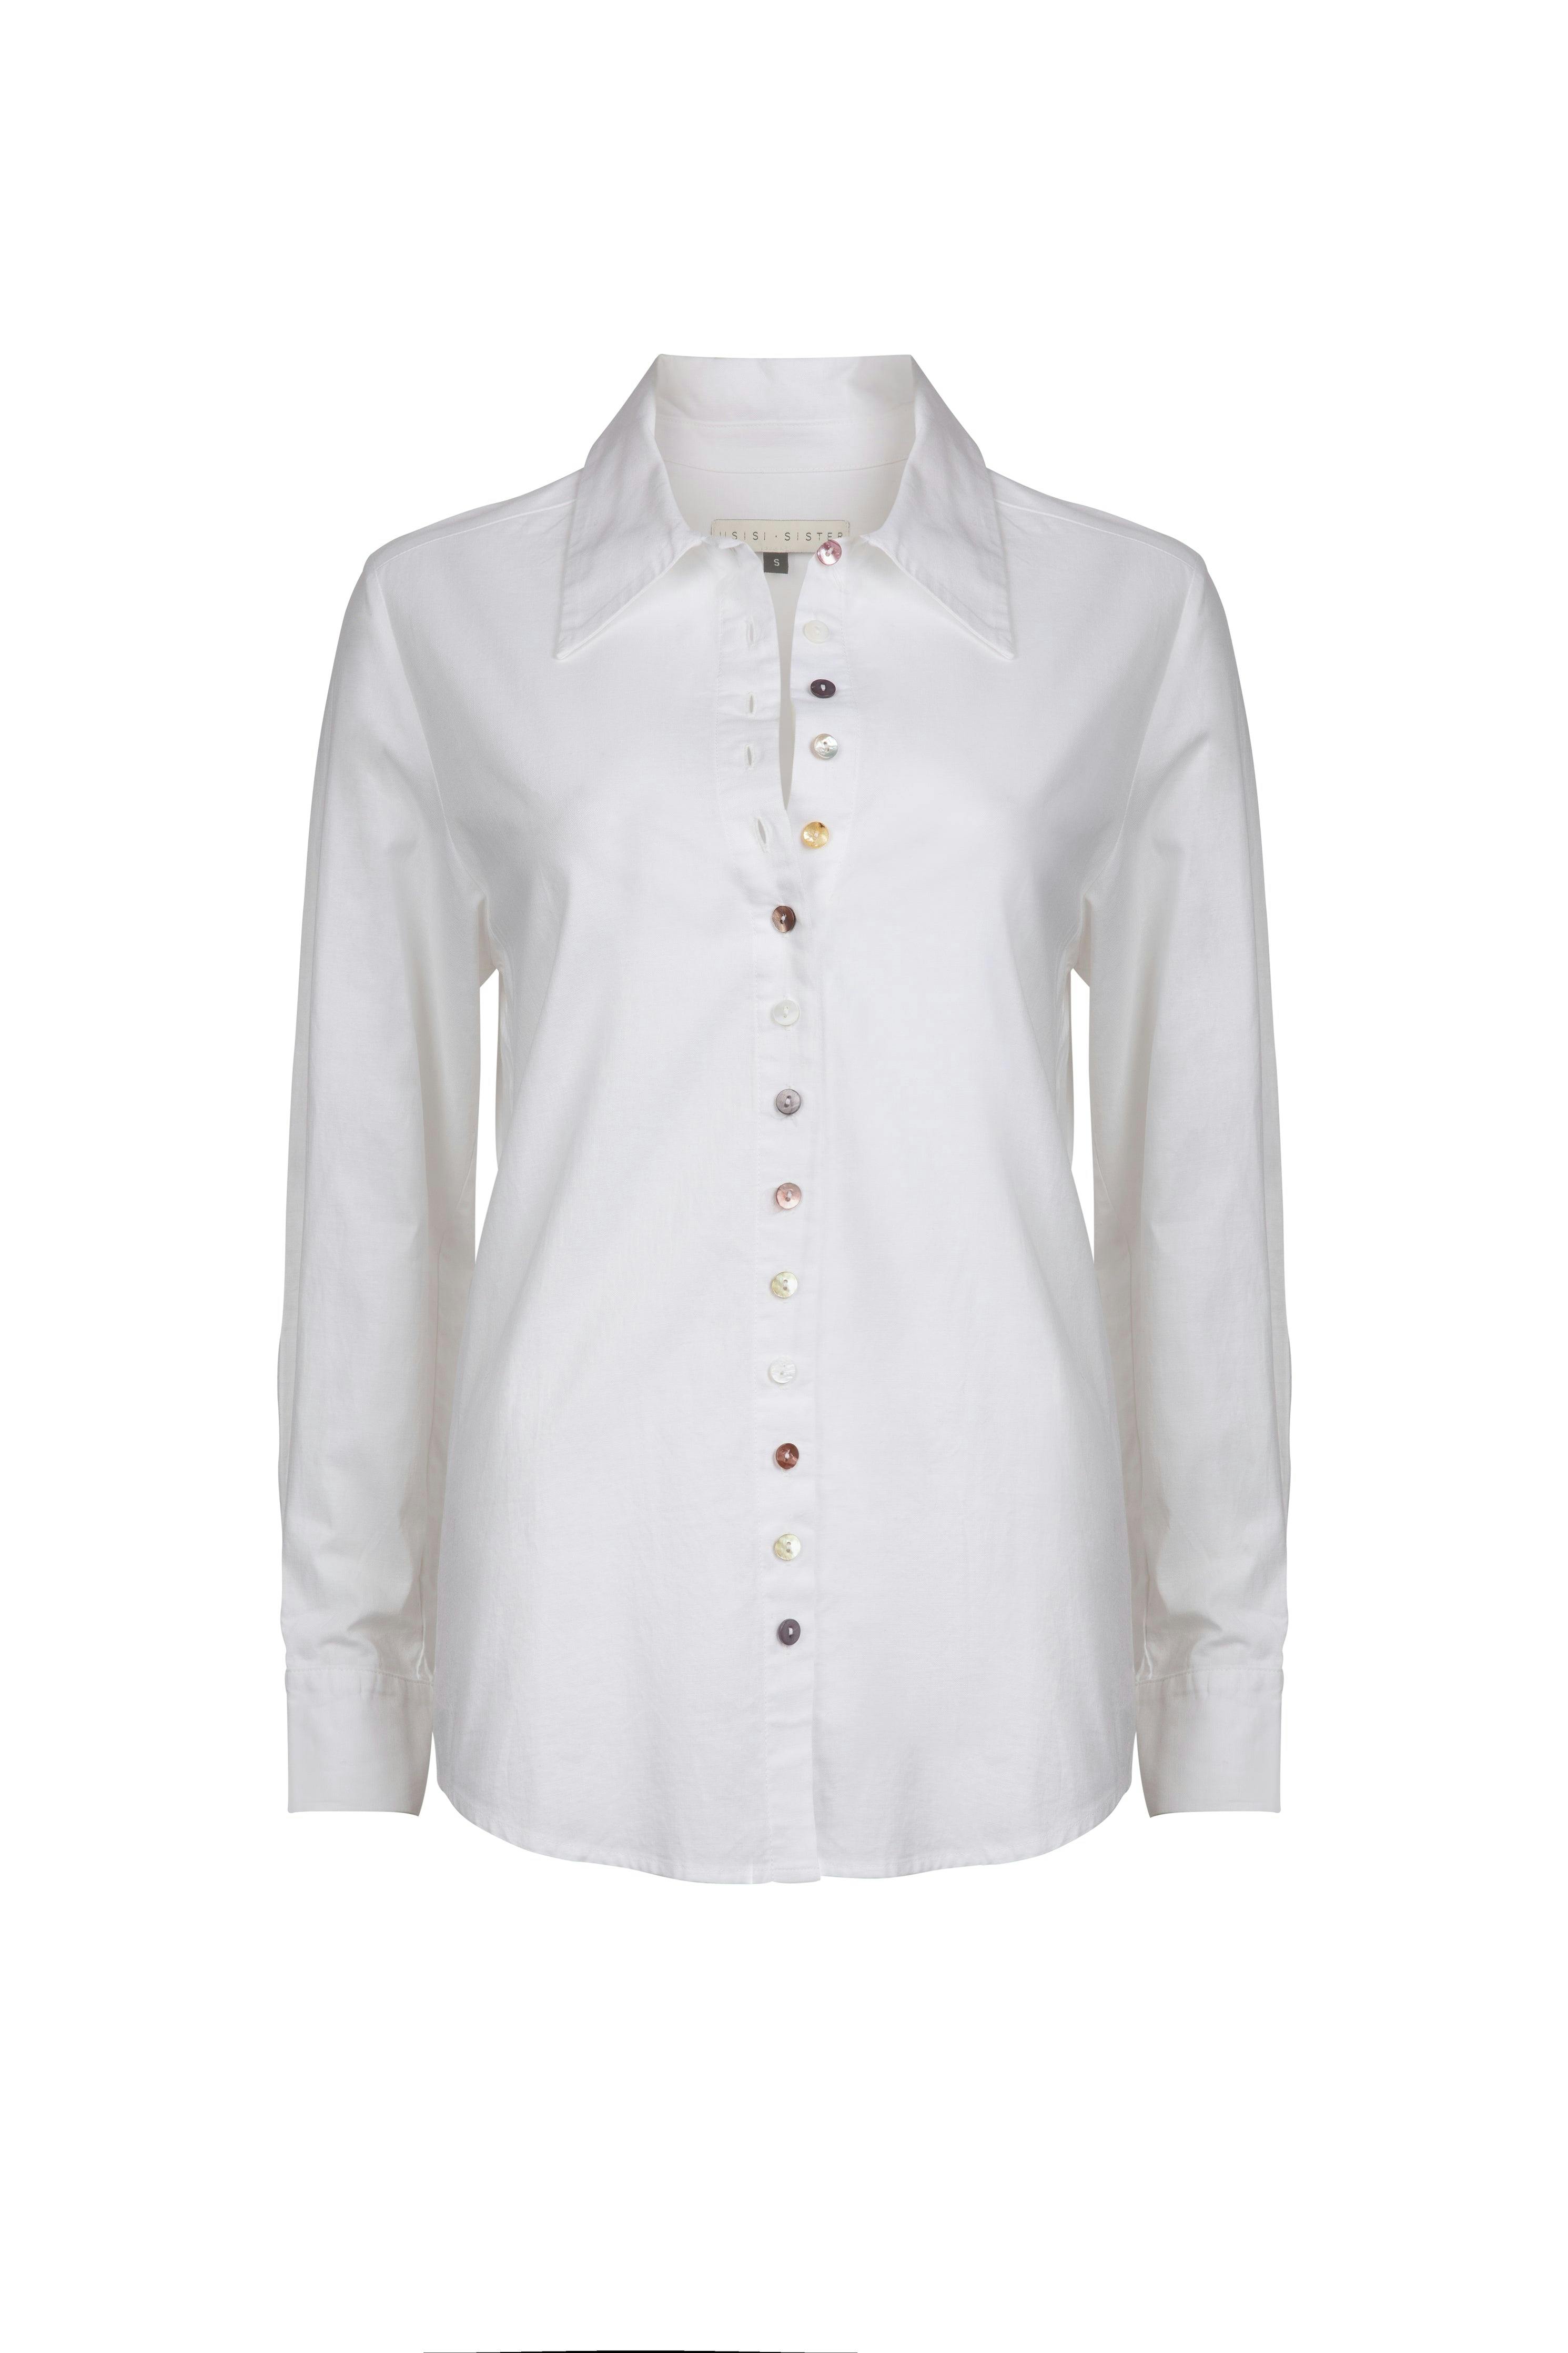 Minnie white cotton shirt with mother of pearl detail